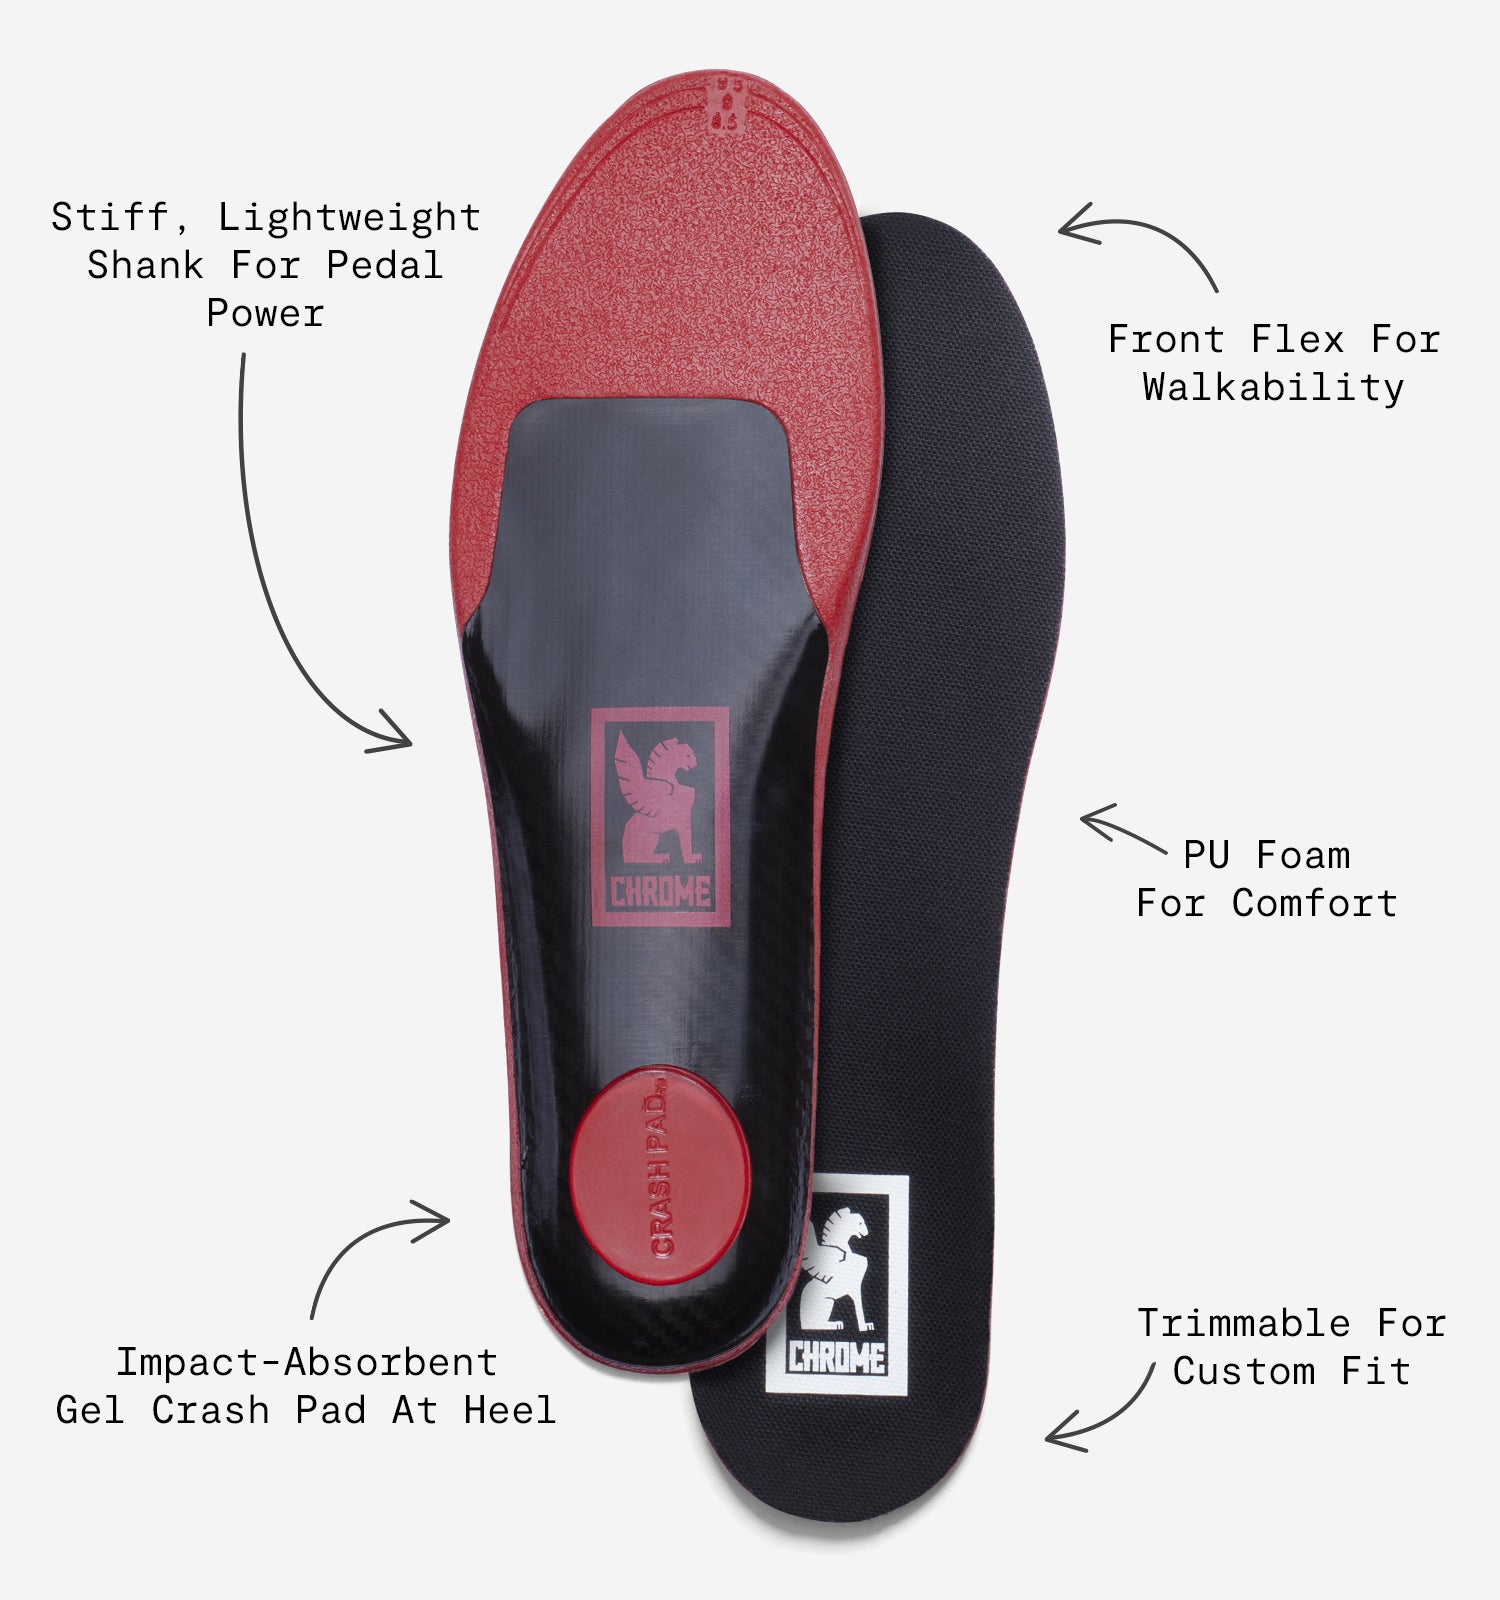 Power Pedal insole to turns your shoes into power bike shoes